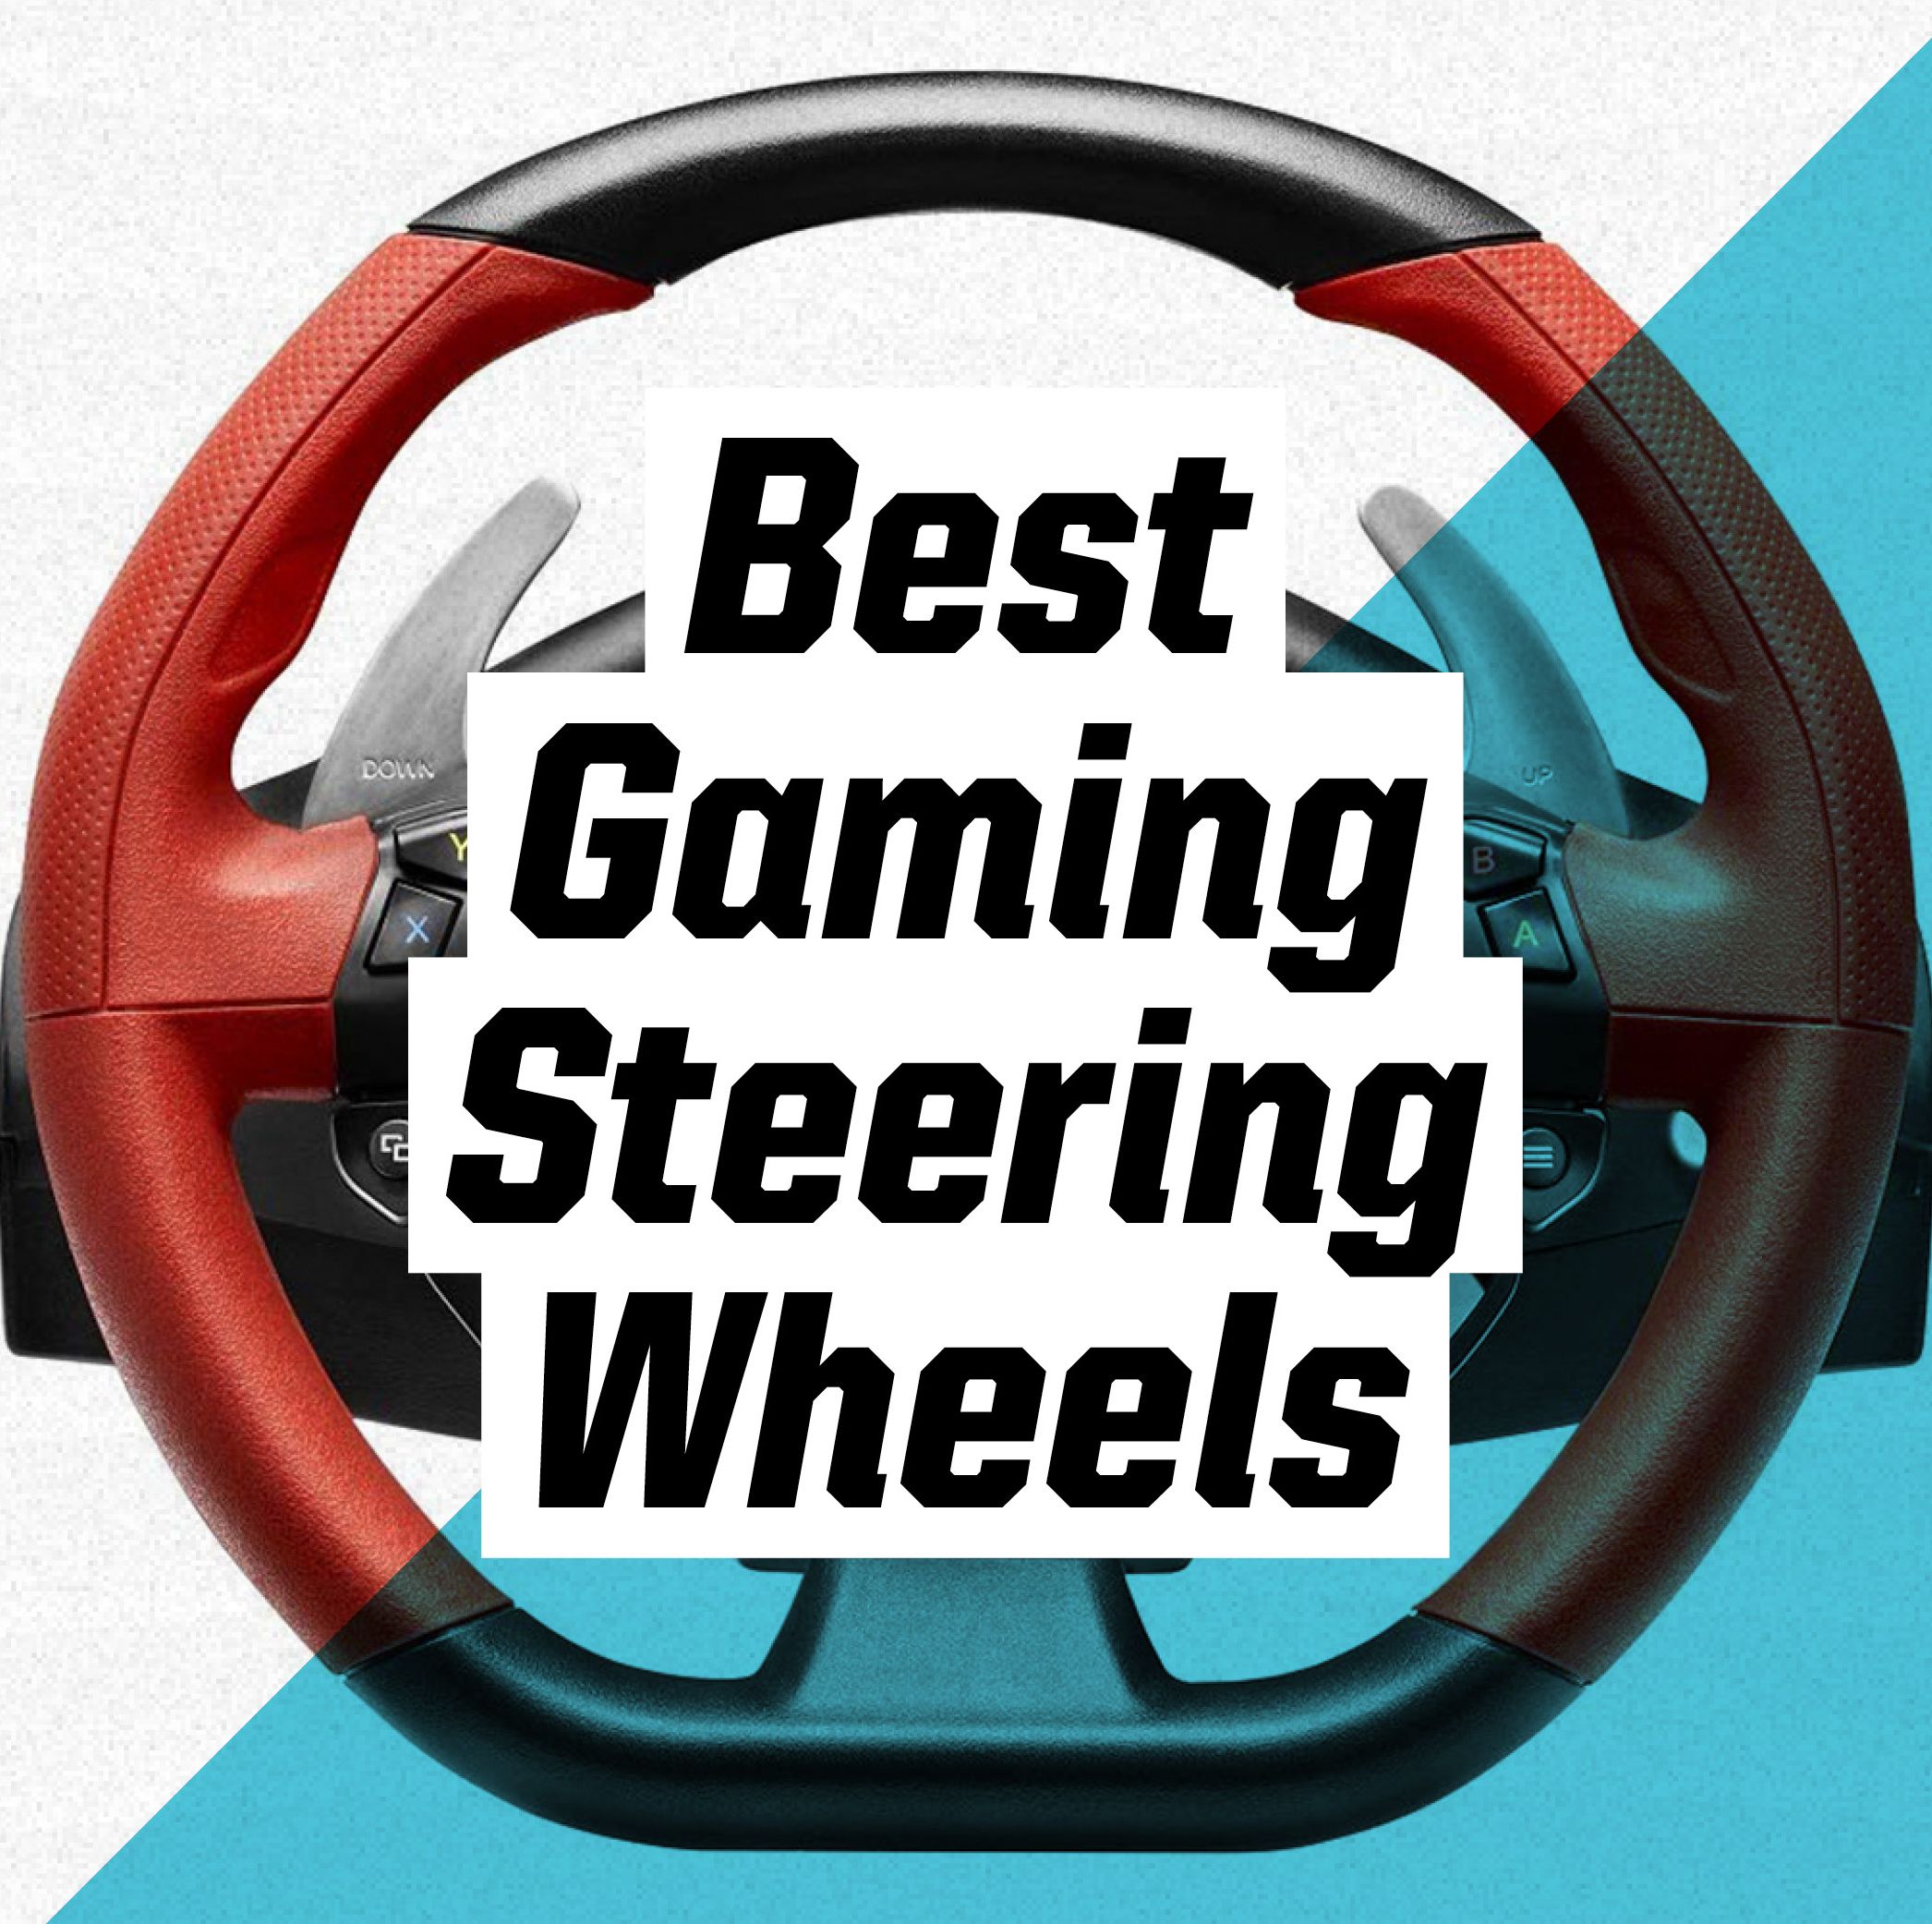 The Most Popular Gaming Steering Wheels for Xbox, Playstation, and PC Gamers